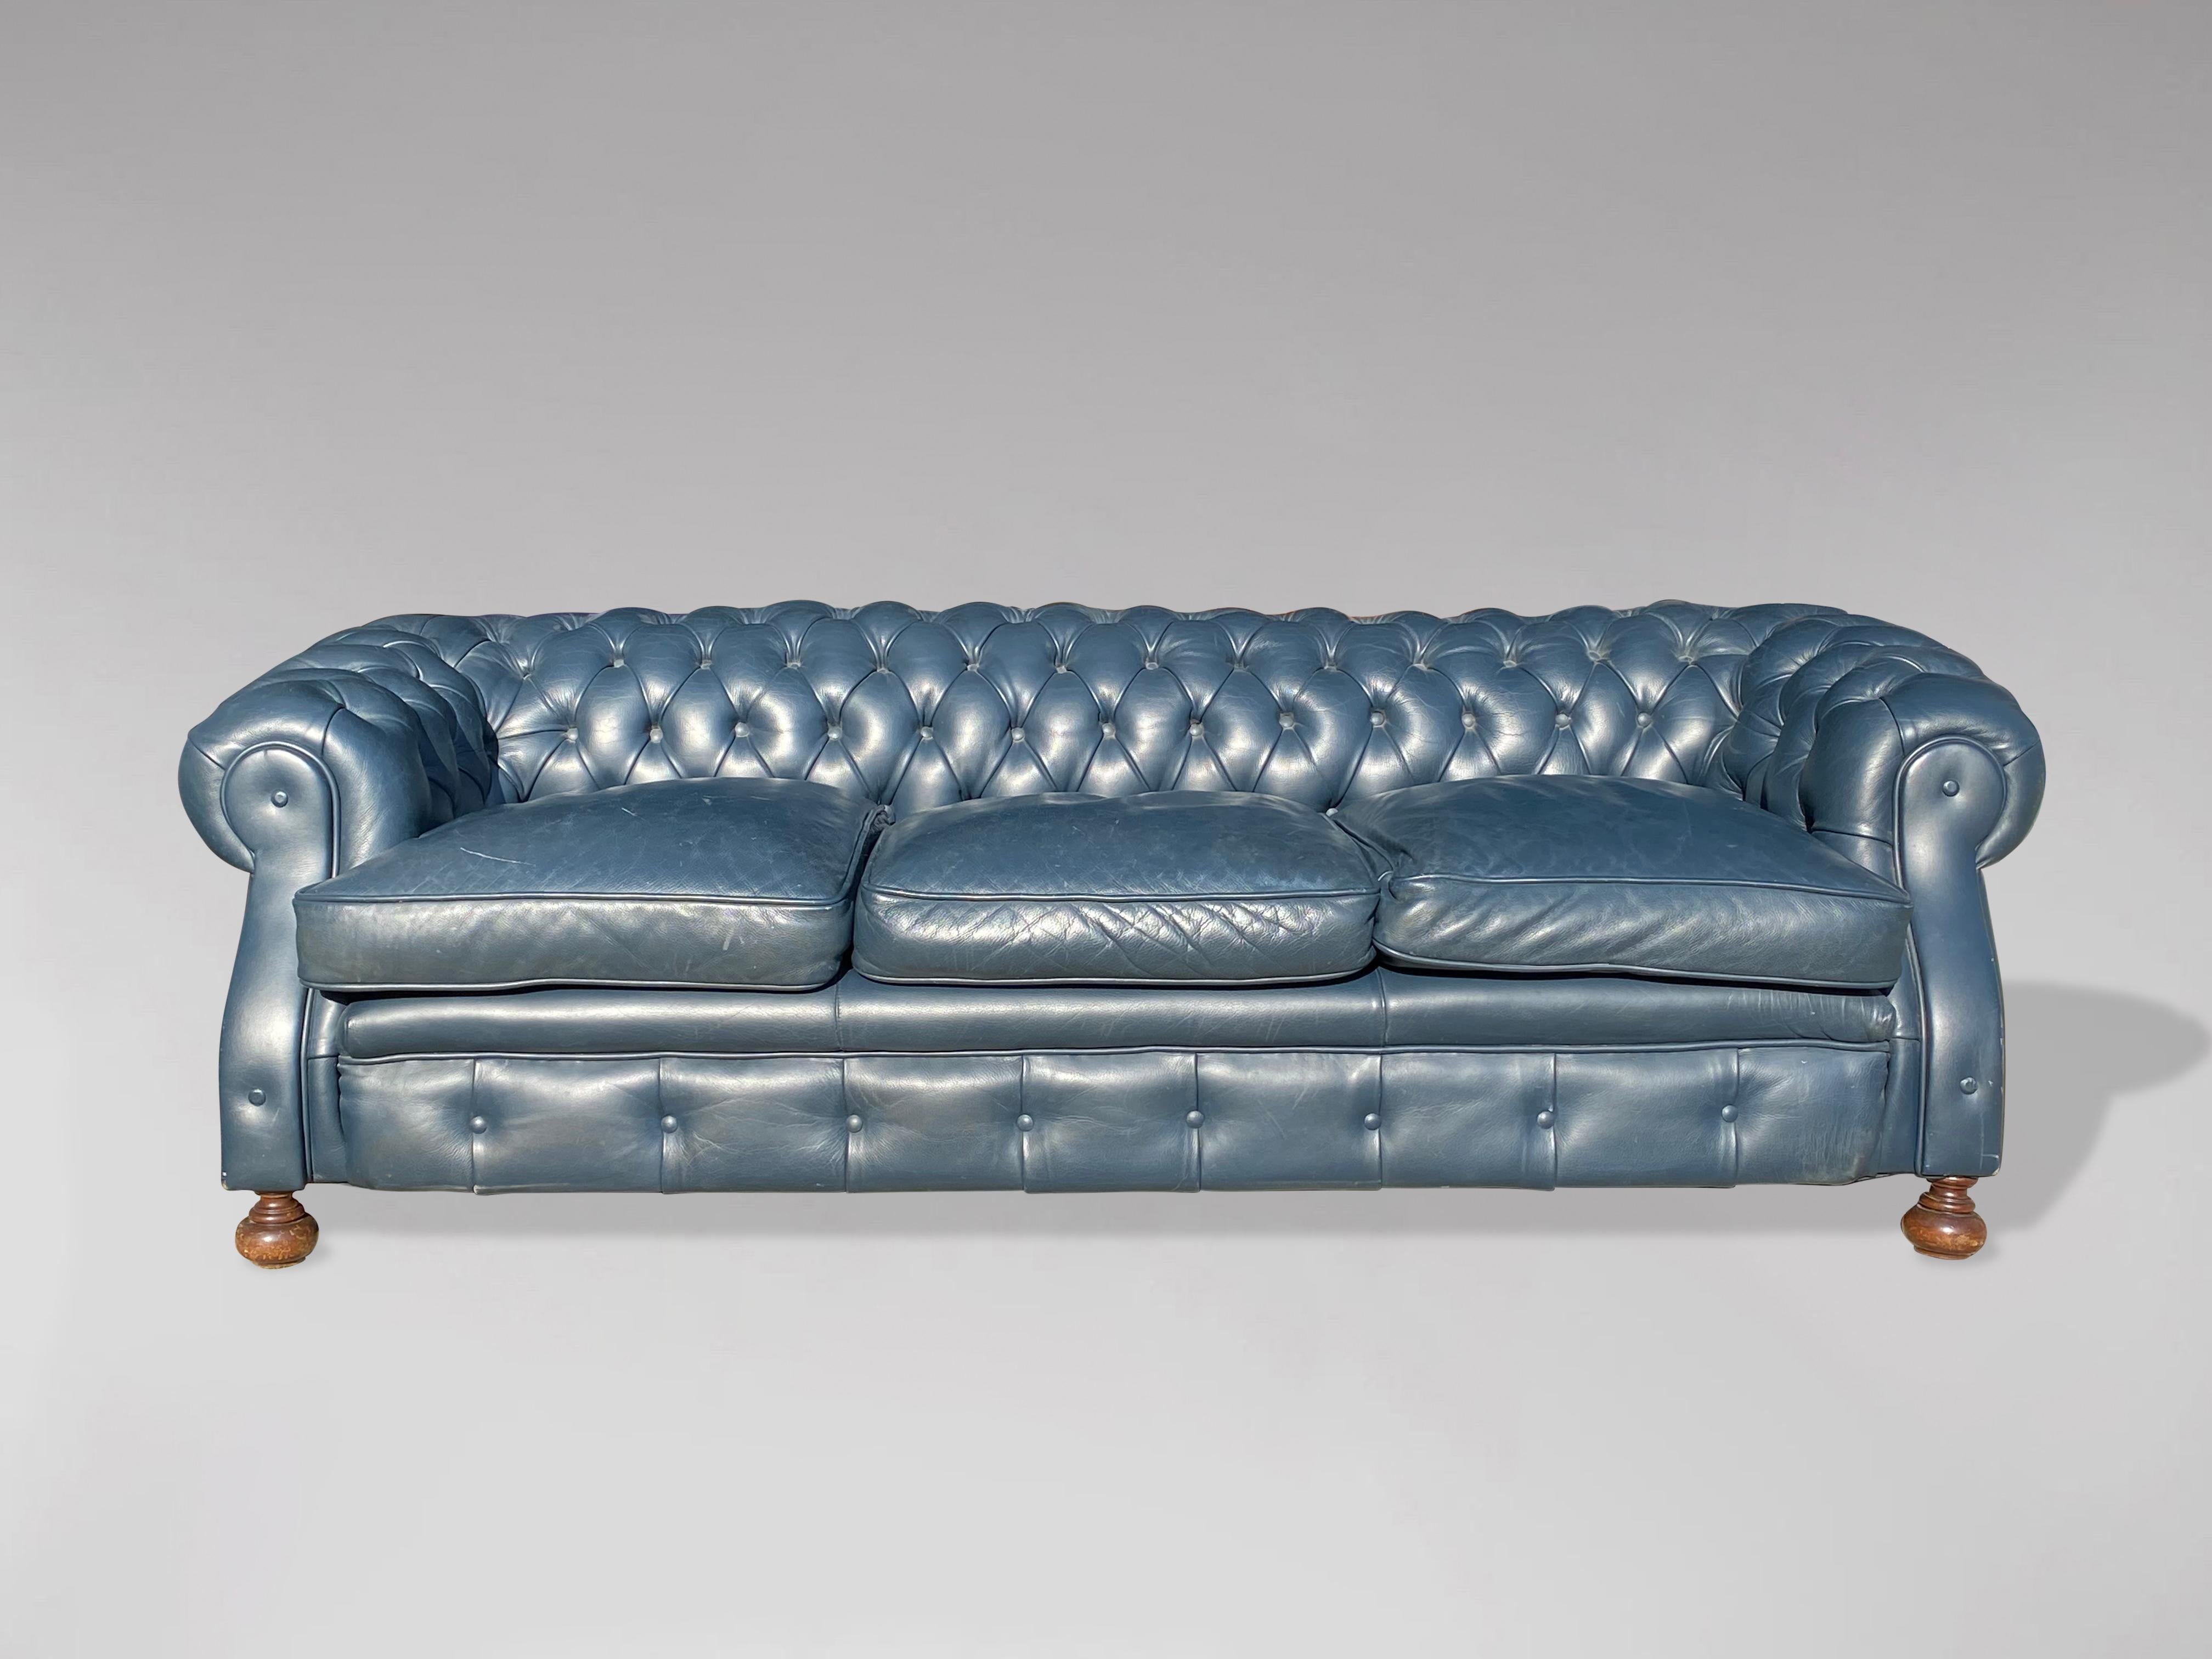 A superb quality 20th century large three seater blue leather chesterfield with three loose feathered cushions, raised on 5 bun feet. A fine example of a good quality with a good patina comfortable chesterfield. With the original quality blue